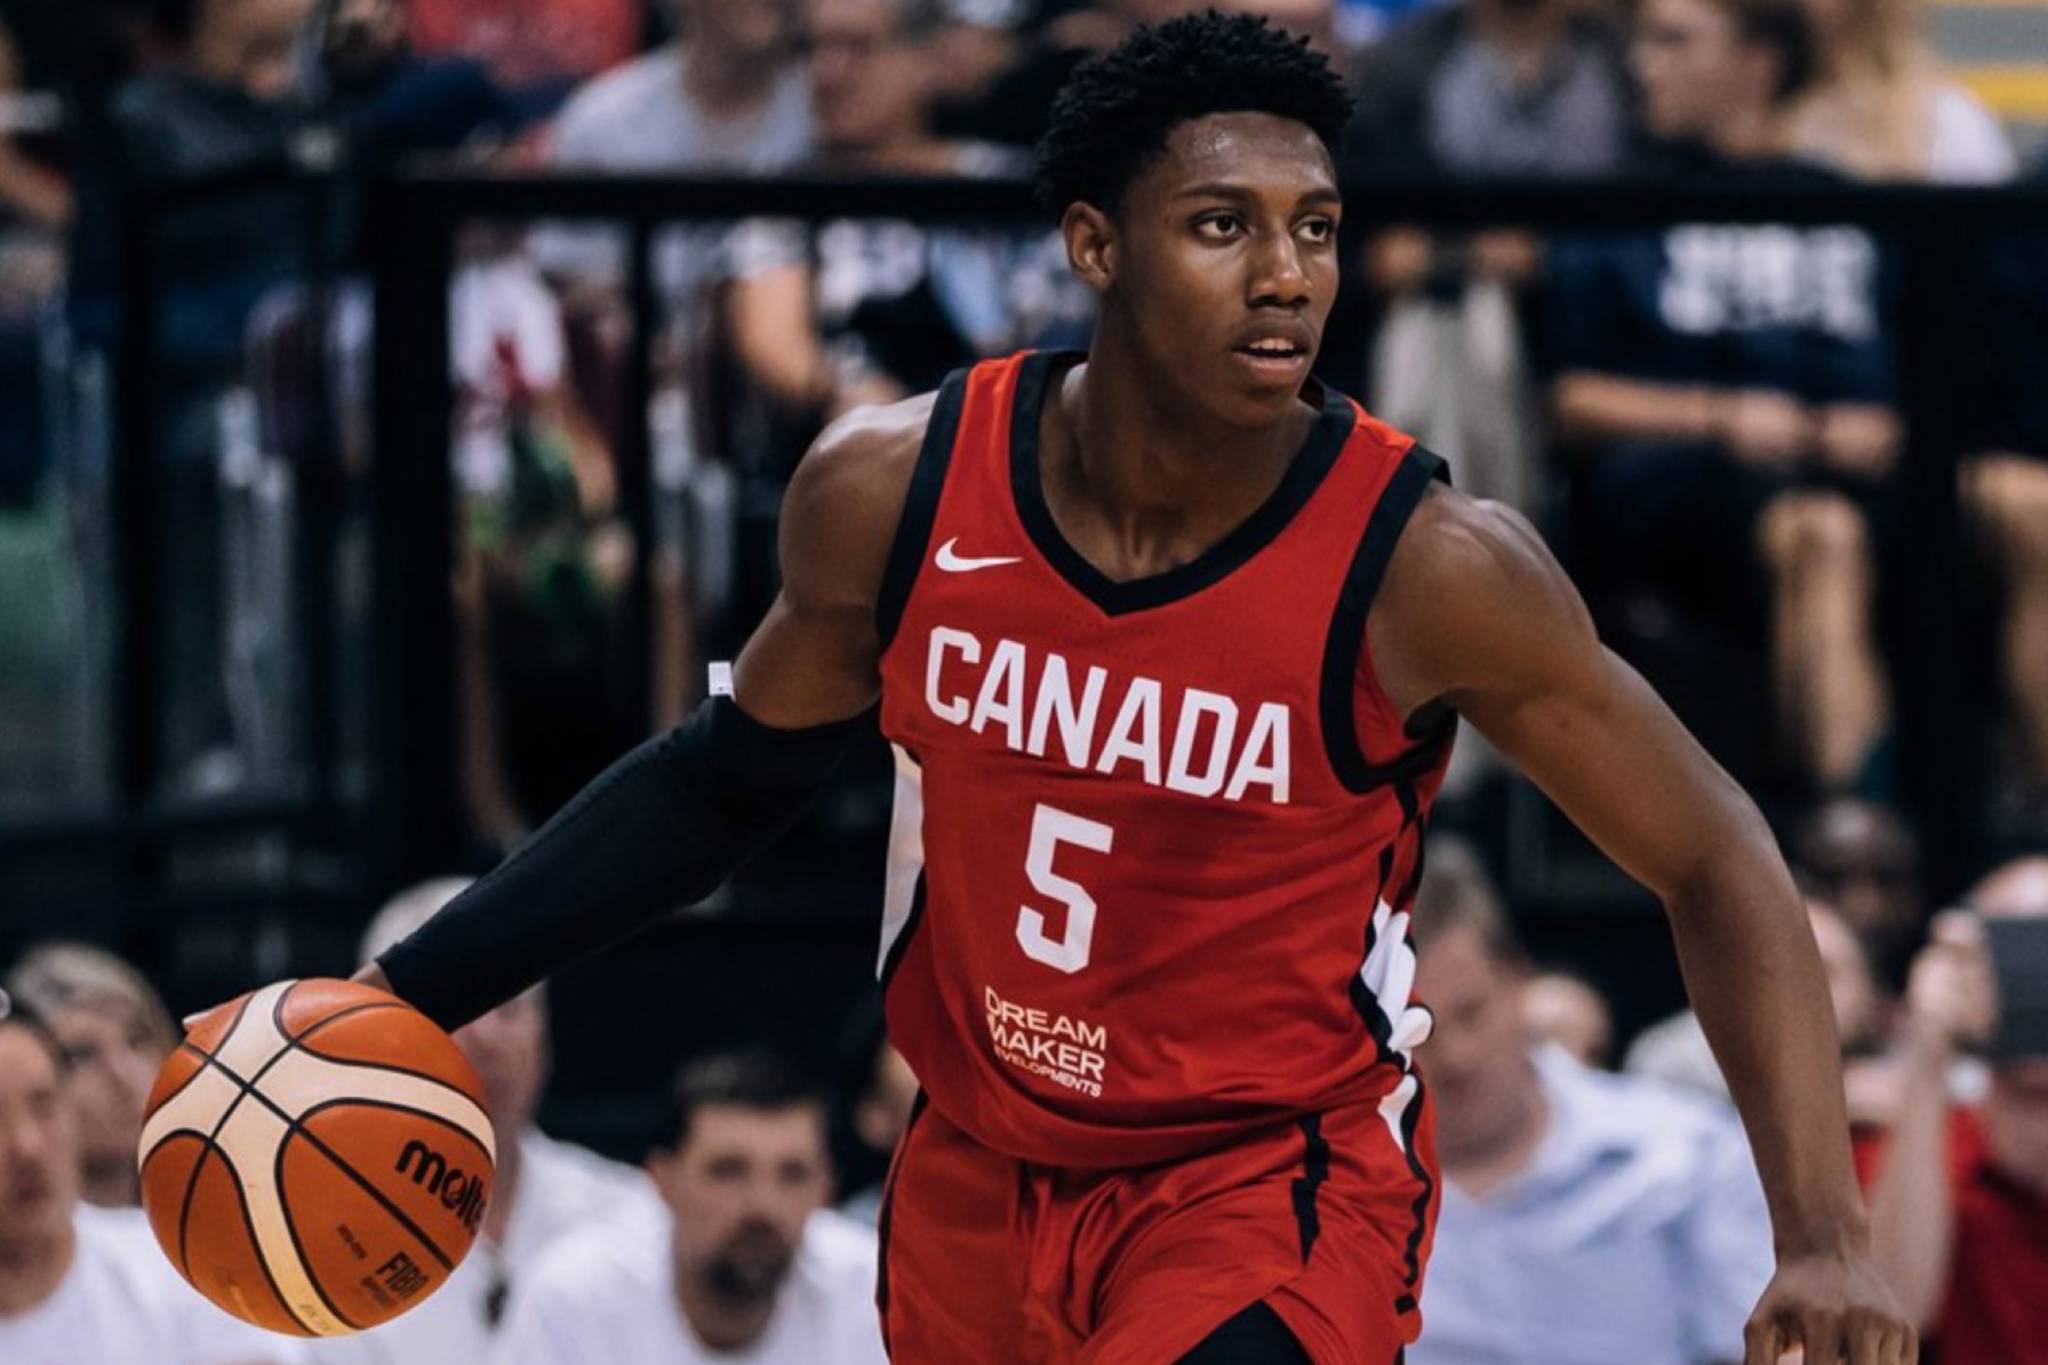 Duke University’s R.J. Barrett could potentially help Canada through a tough group stage at the 2019 FIBA World Cup (via @timandsid/Twitter).